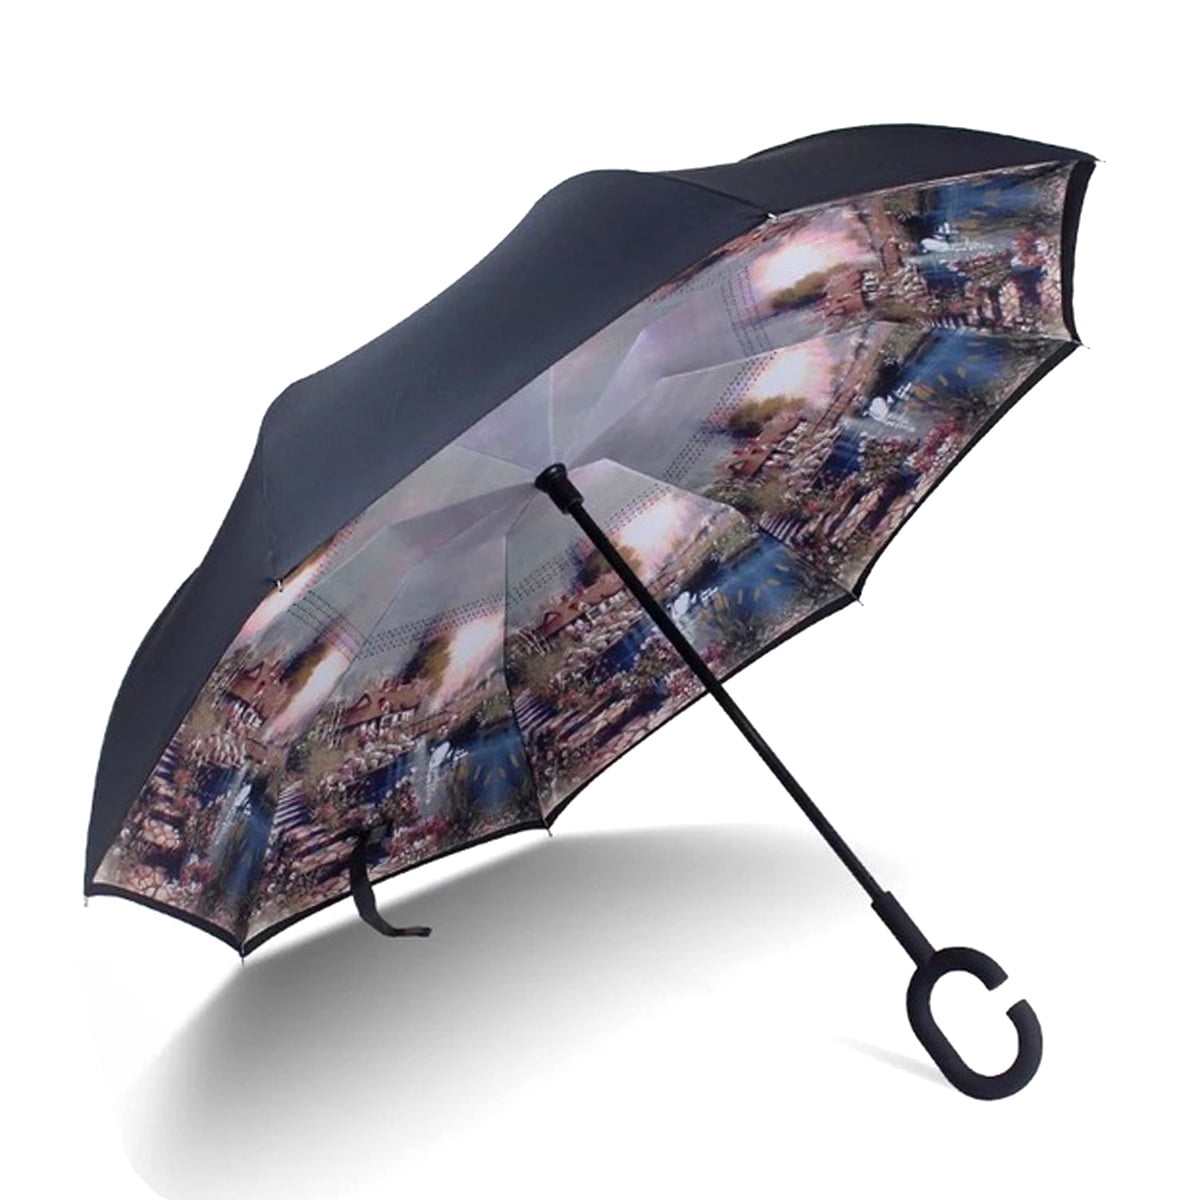 Reversible Folding Double Layer Upside Down UV Protection Unique Windproof Brella That Open Better Than Most Umbrellas Reverse Inverted Inside Out Umbrella 